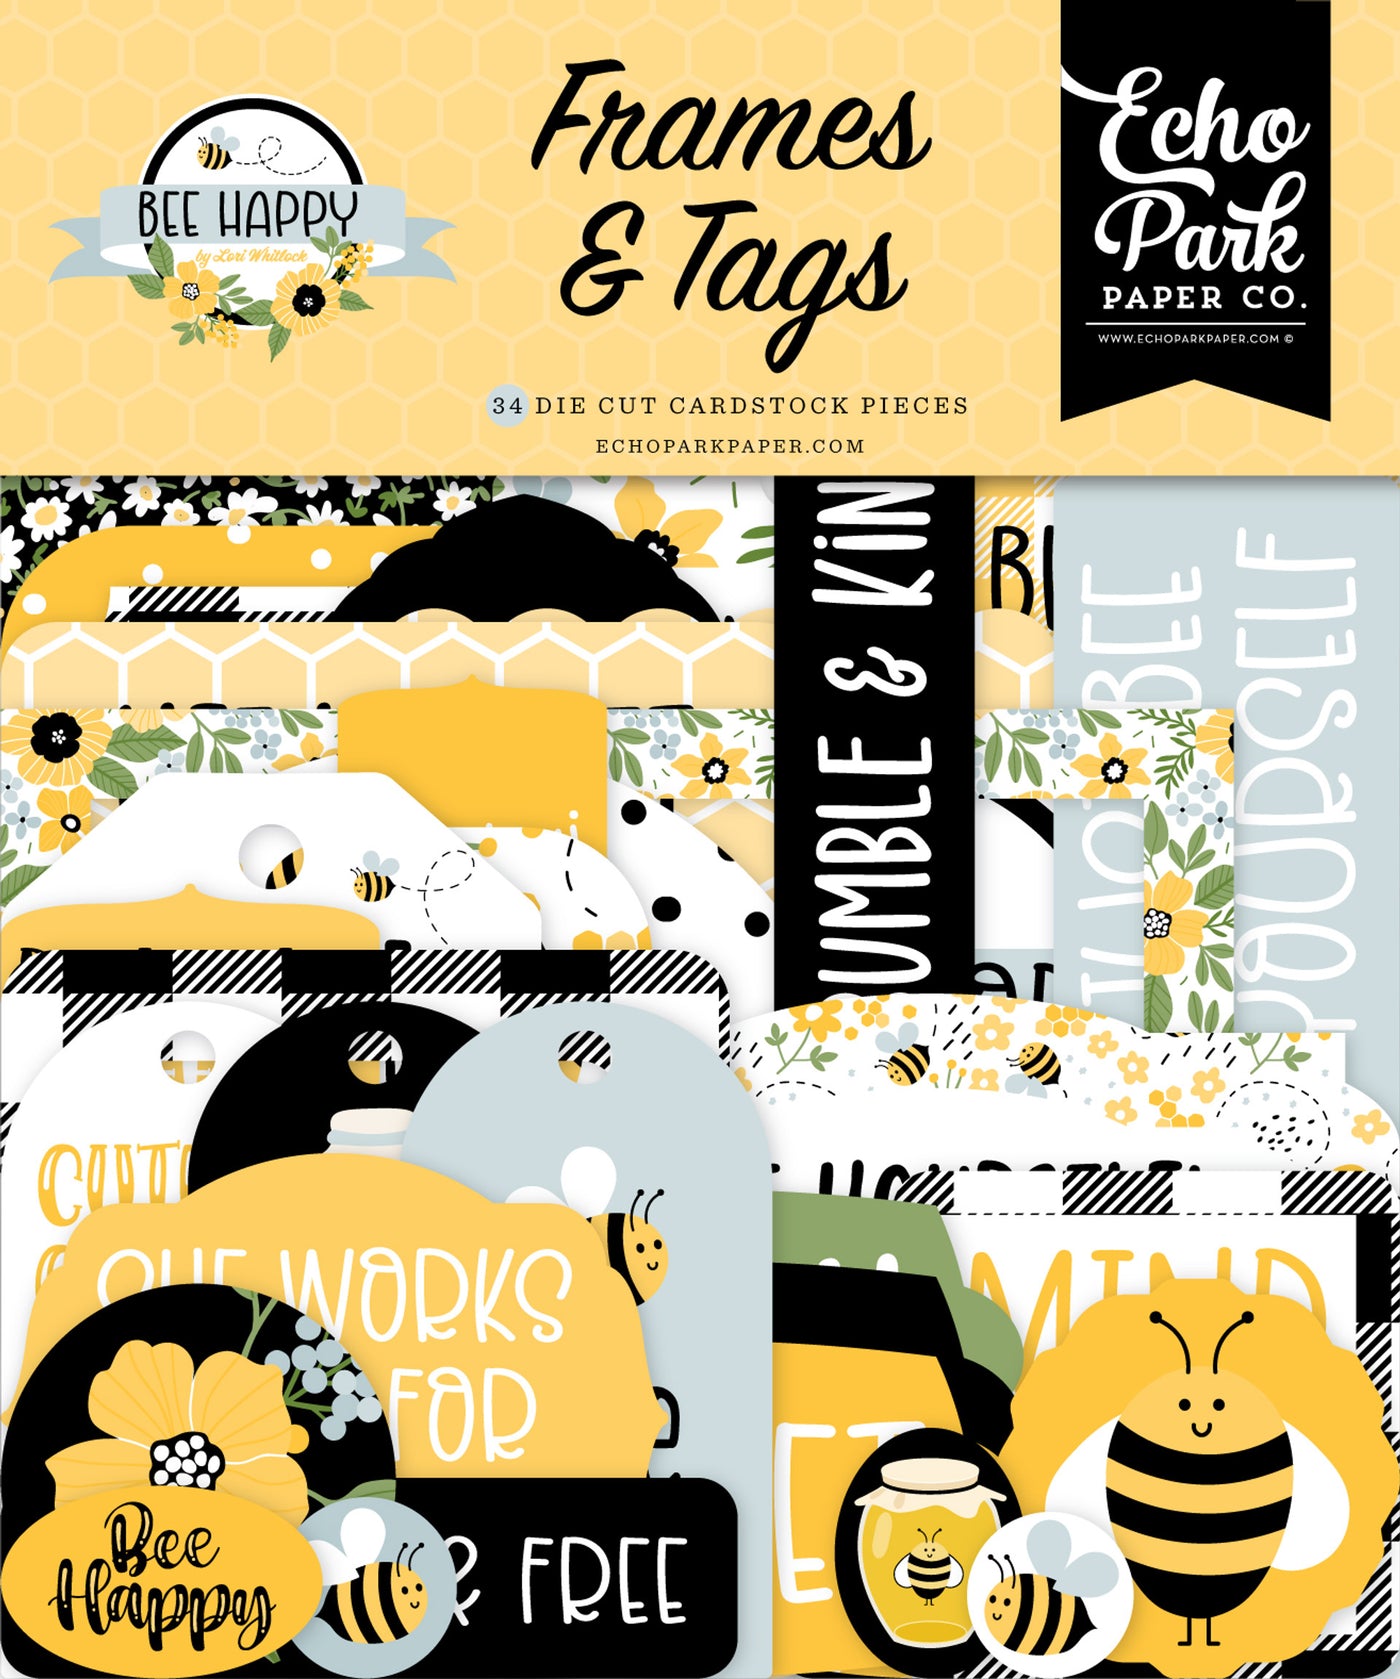 BEE HAPPY Frames & Tags Die Cut Cardstock Pack includes 34 different die-cut shapes ready to embellish any project. 